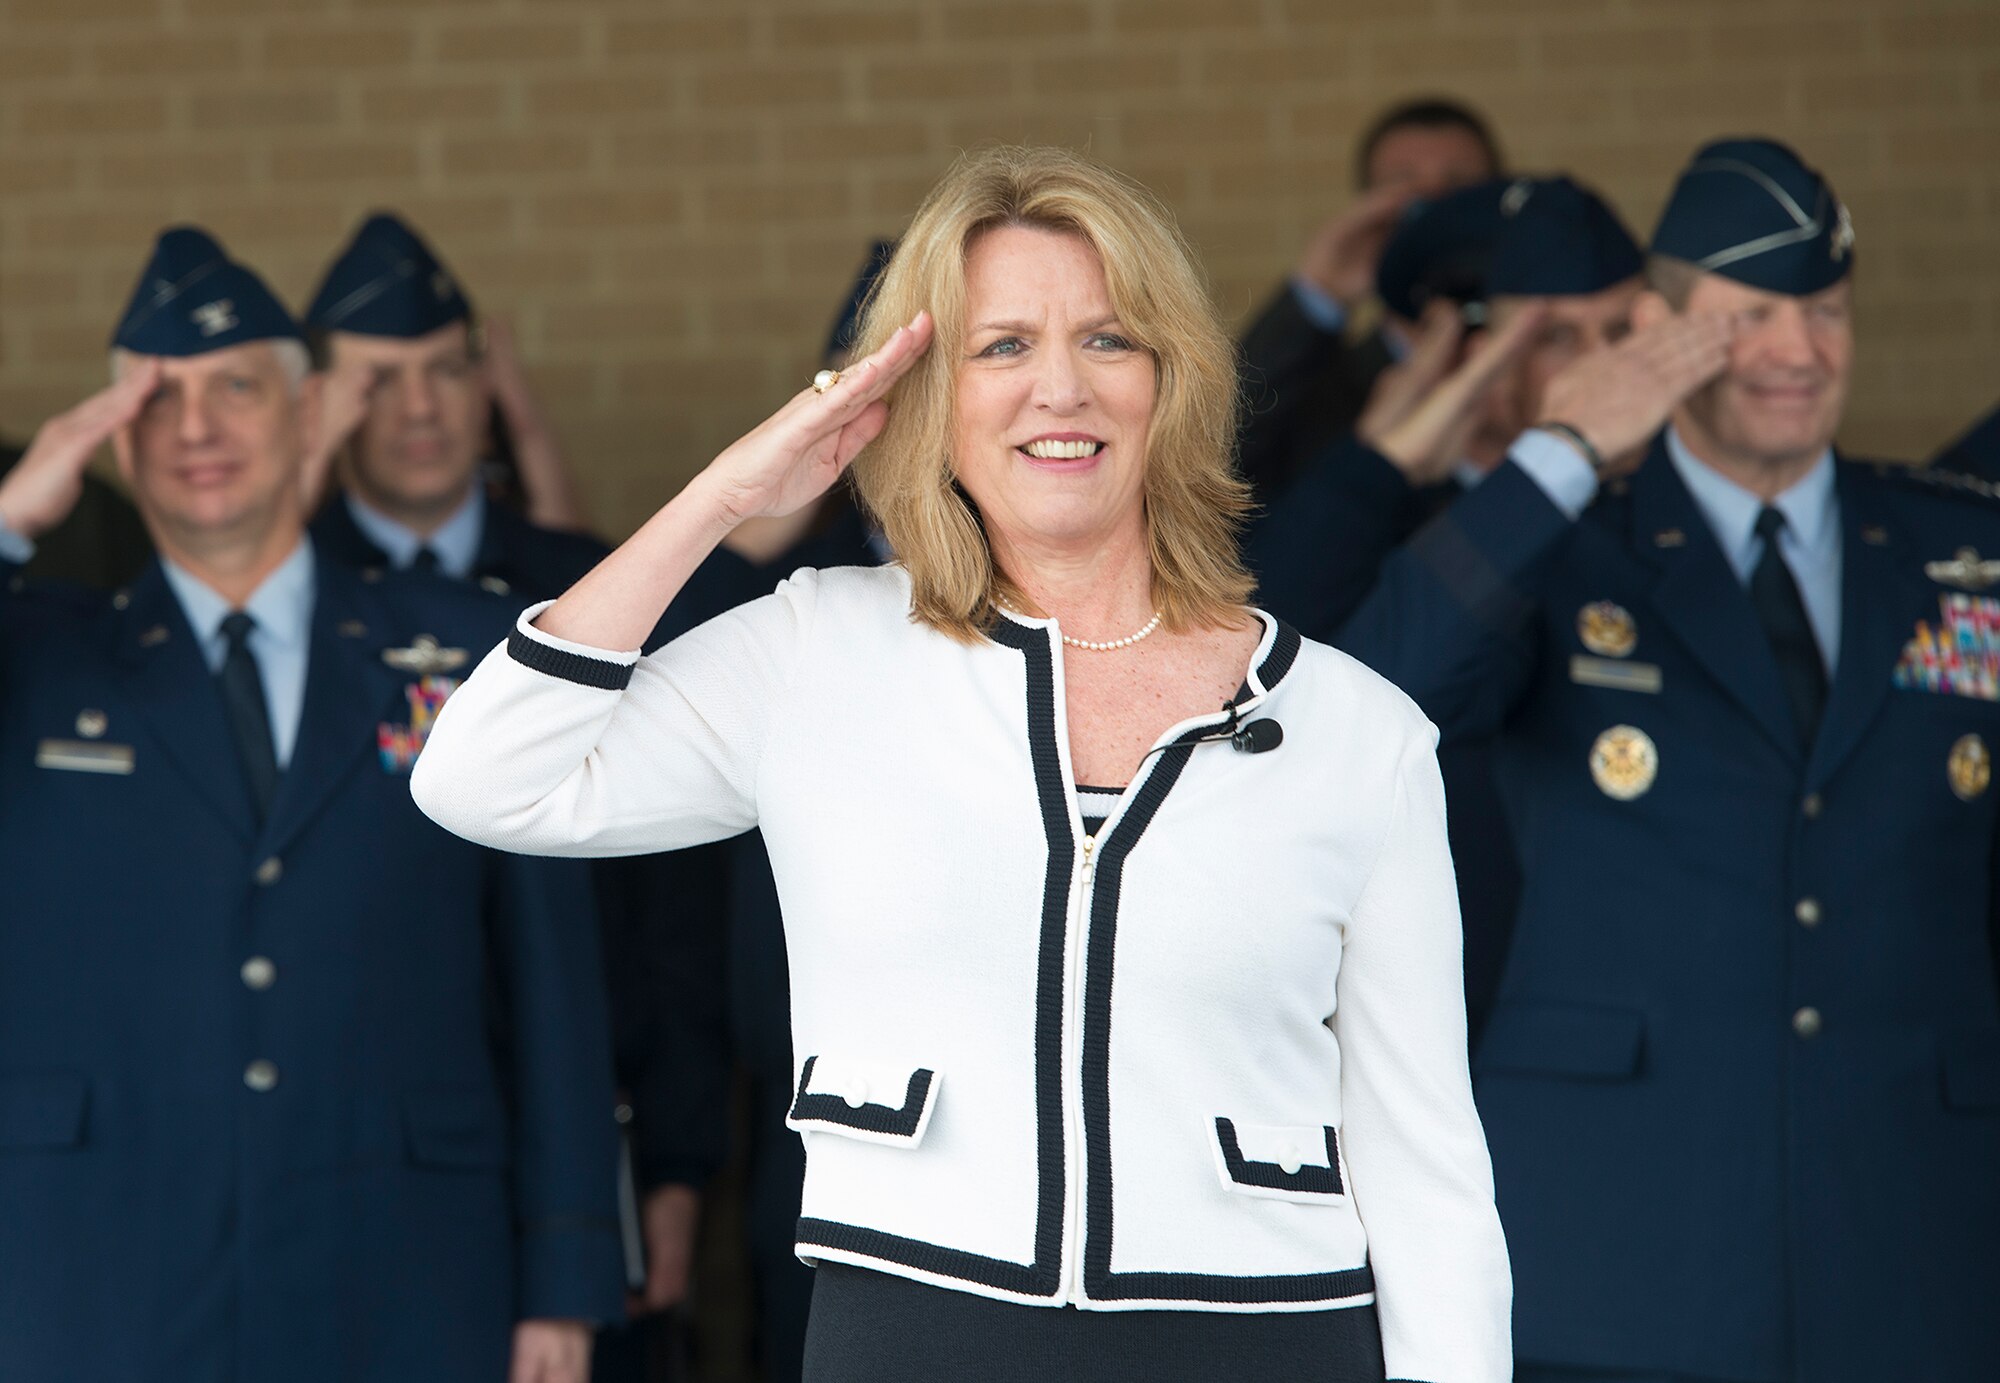 Secretary of the Air Force Deborah Lee James renders a salute during pass and review at the basic military training graduation Jan. 31 at Joint Base San Antonio-Lackland. (U.S. Air Force photo by Benjamin Faske)